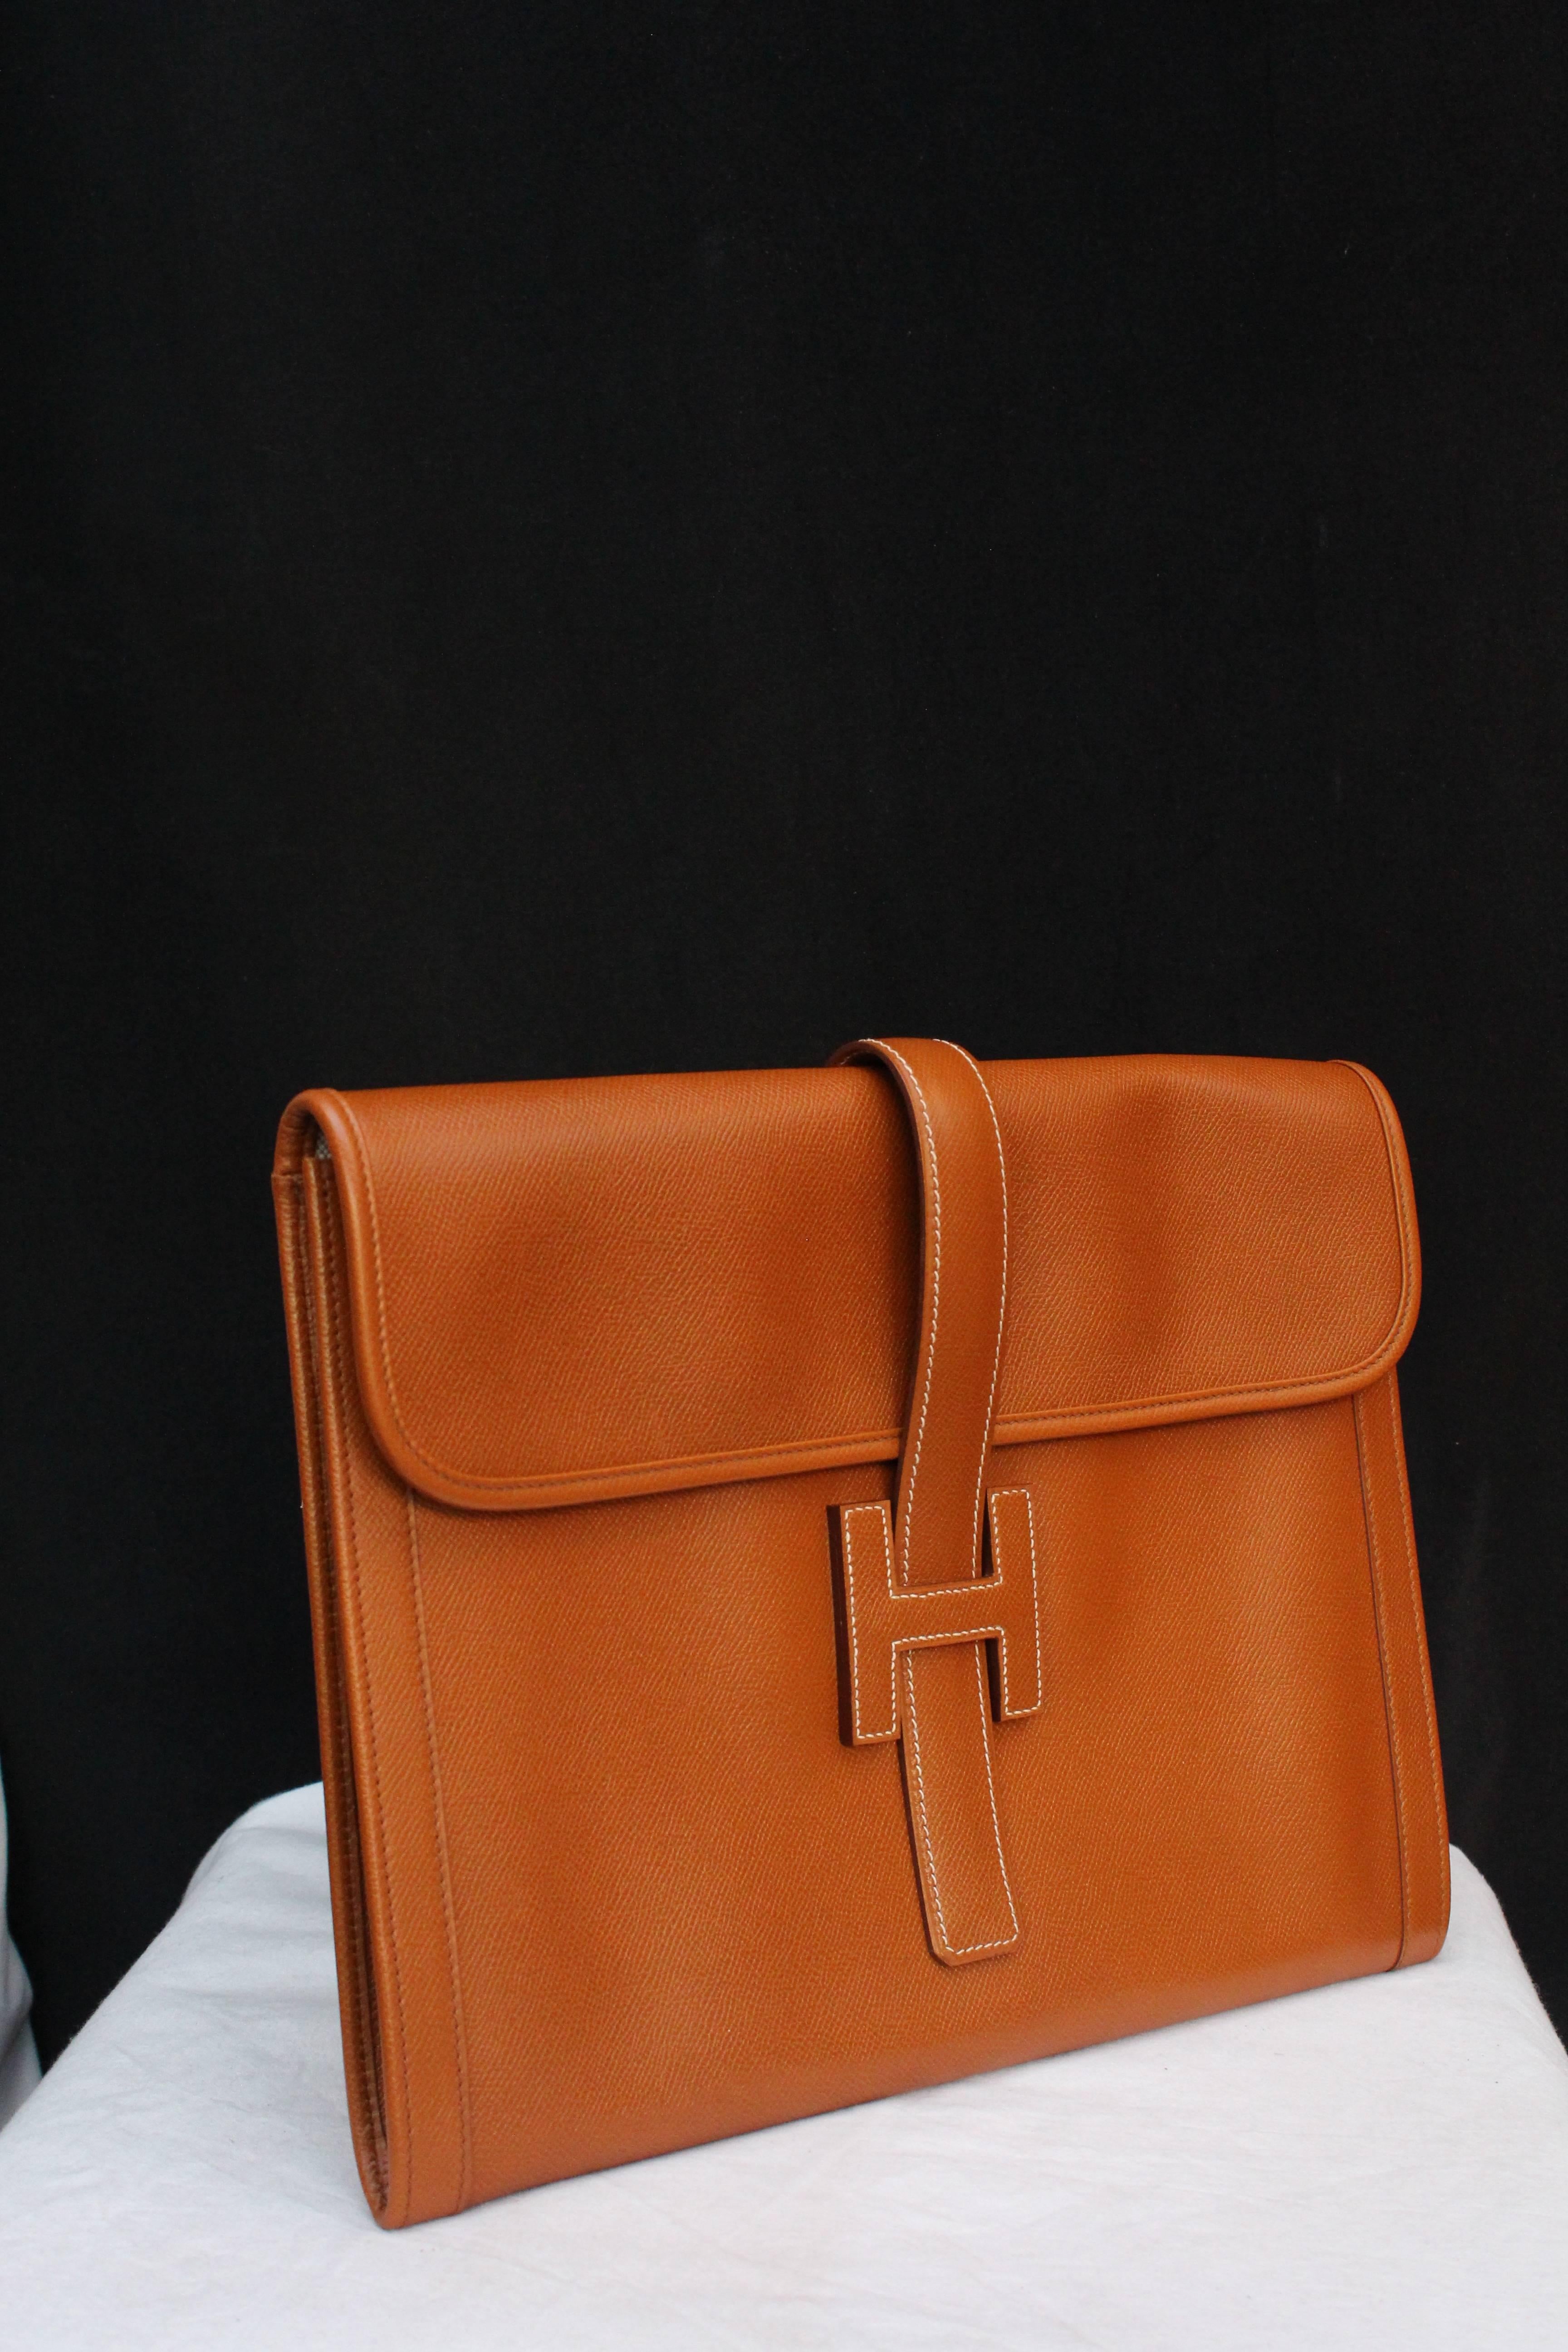 HERMES (Made in France) “Jige” clutch in tan color togo leather. It opens with a leather strap going through the H clutch. Beige fabric lining.

Width 34 cm (13.5 in); height 25 cm (10 in); Depth 2 cm (0.75 in).

Very good condition, apart from a